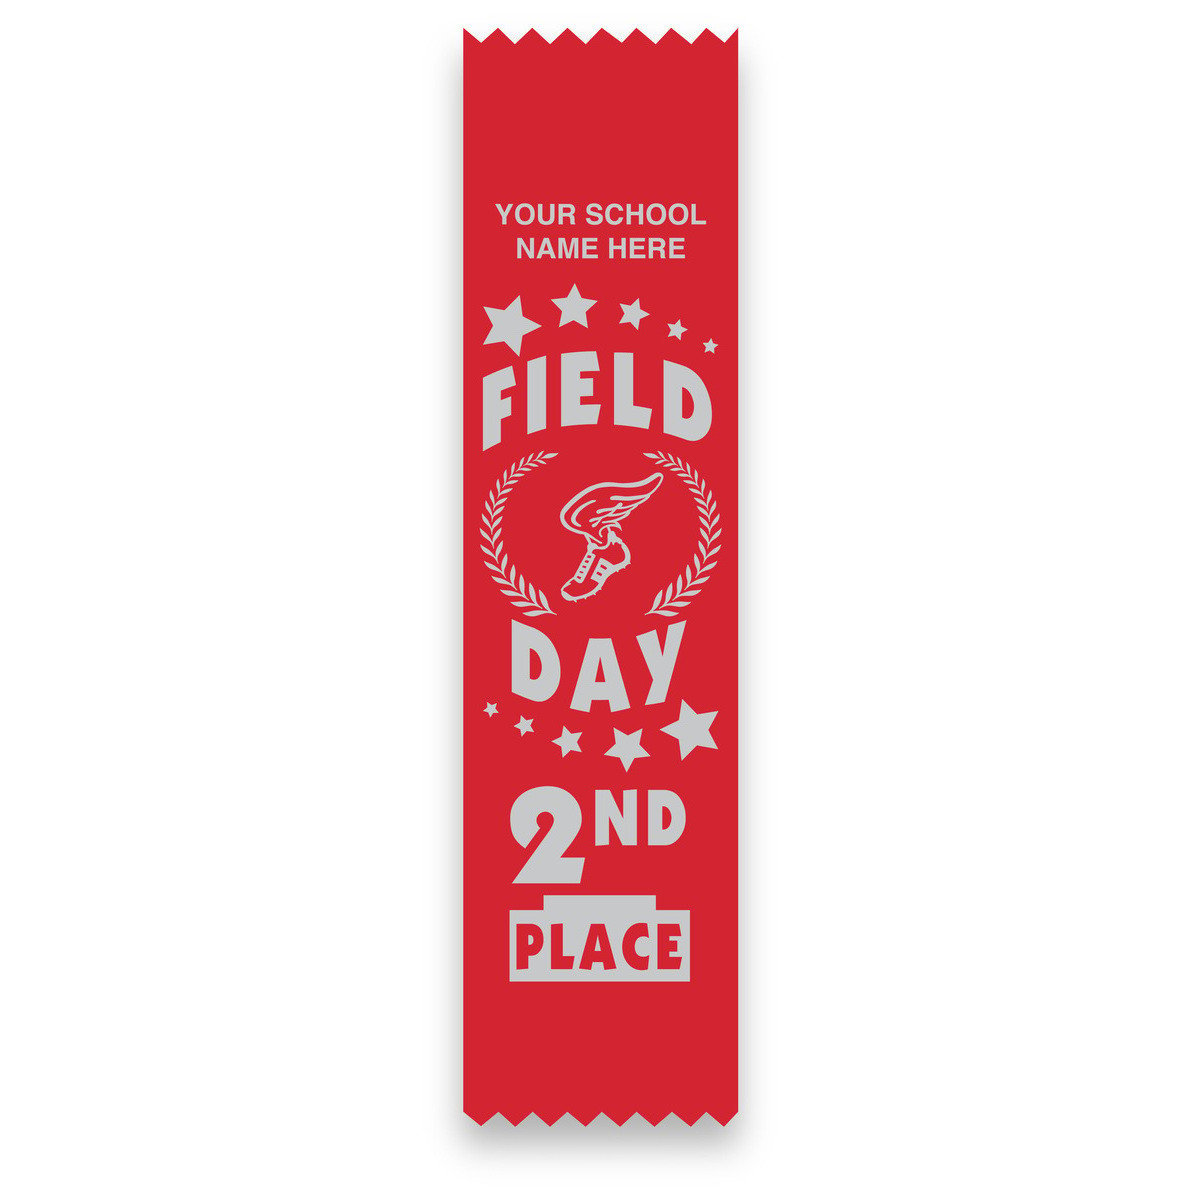 Imprinted Flat Ribbon - Field Day 2nd Place